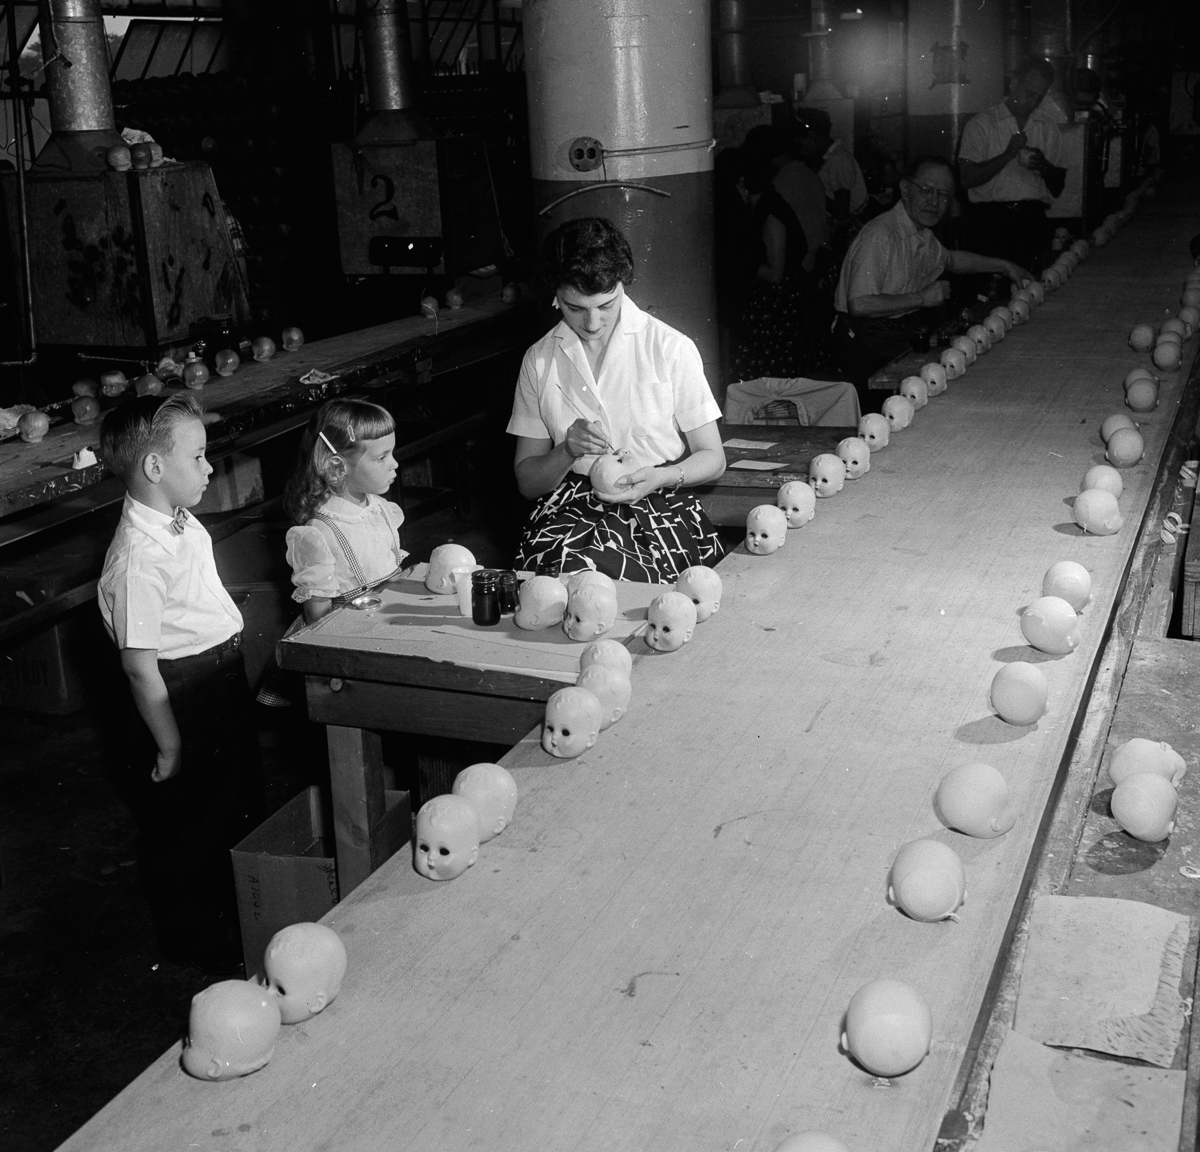 circa 1955: A young boy and girl watching workers putting eyes into dolls' heads as they pass along a conveyor belt at the Ideal Toy Company in Jamaica, Long Island, USA. The company is one of the largest toy manufacturers in the world. (Photo by Orlando /Three Lions/Getty Images)